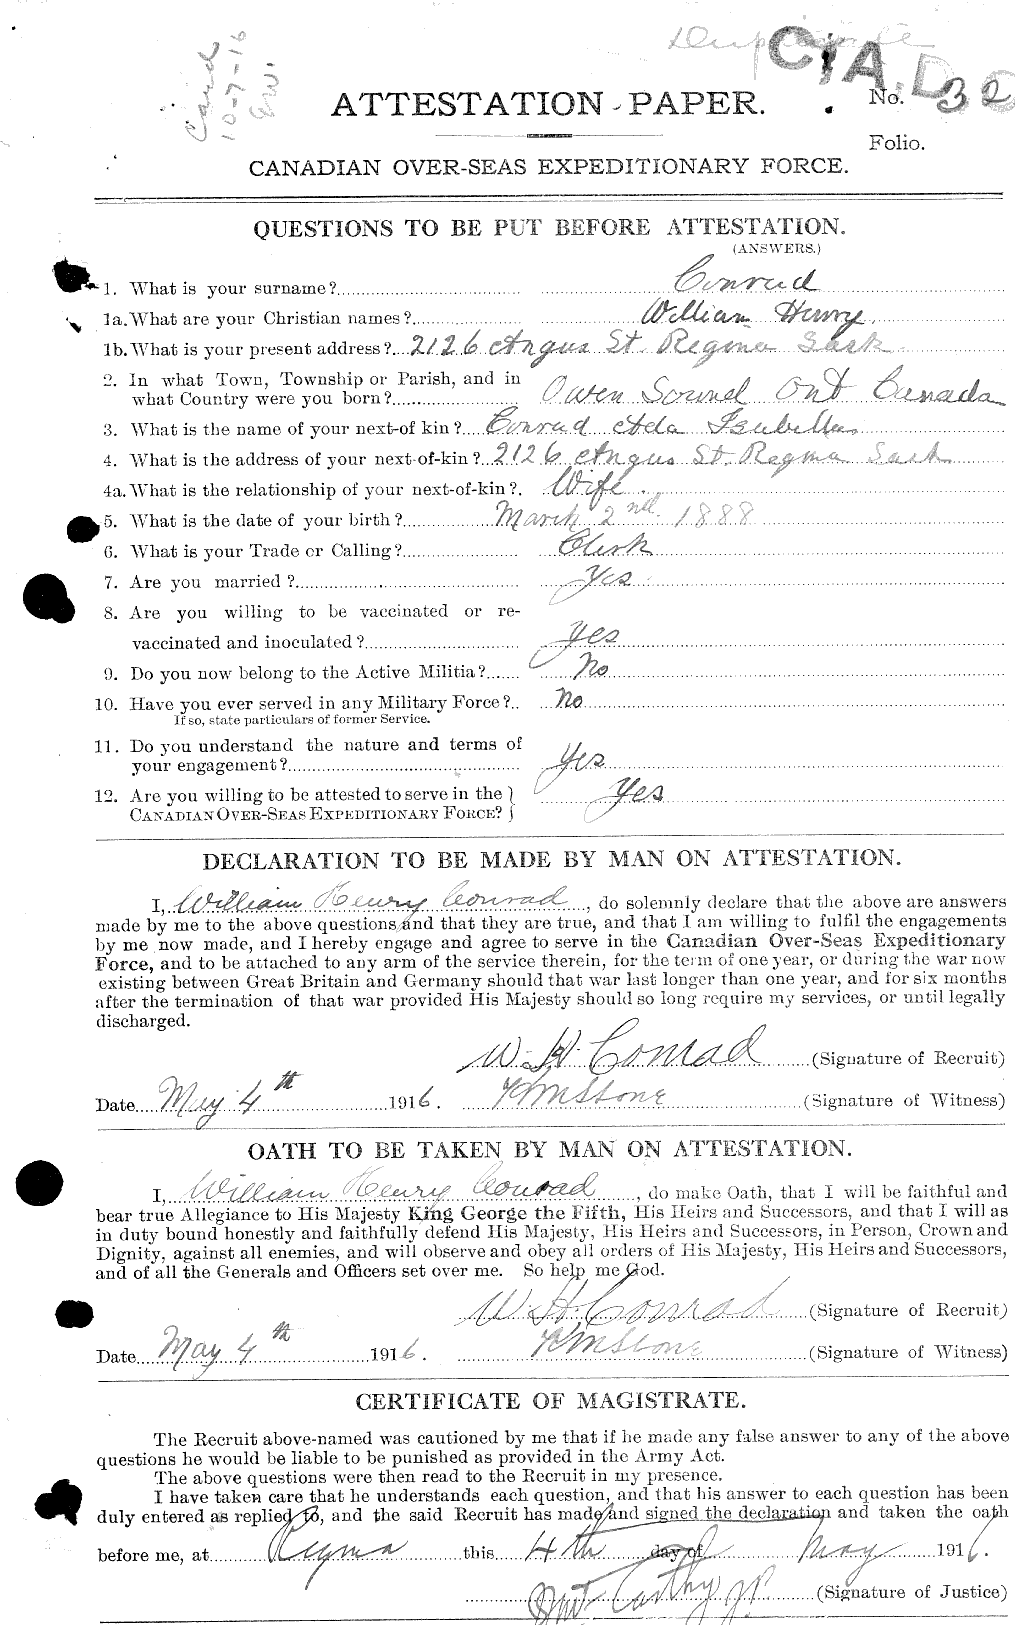 Personnel Records of the First World War - CEF 036170a